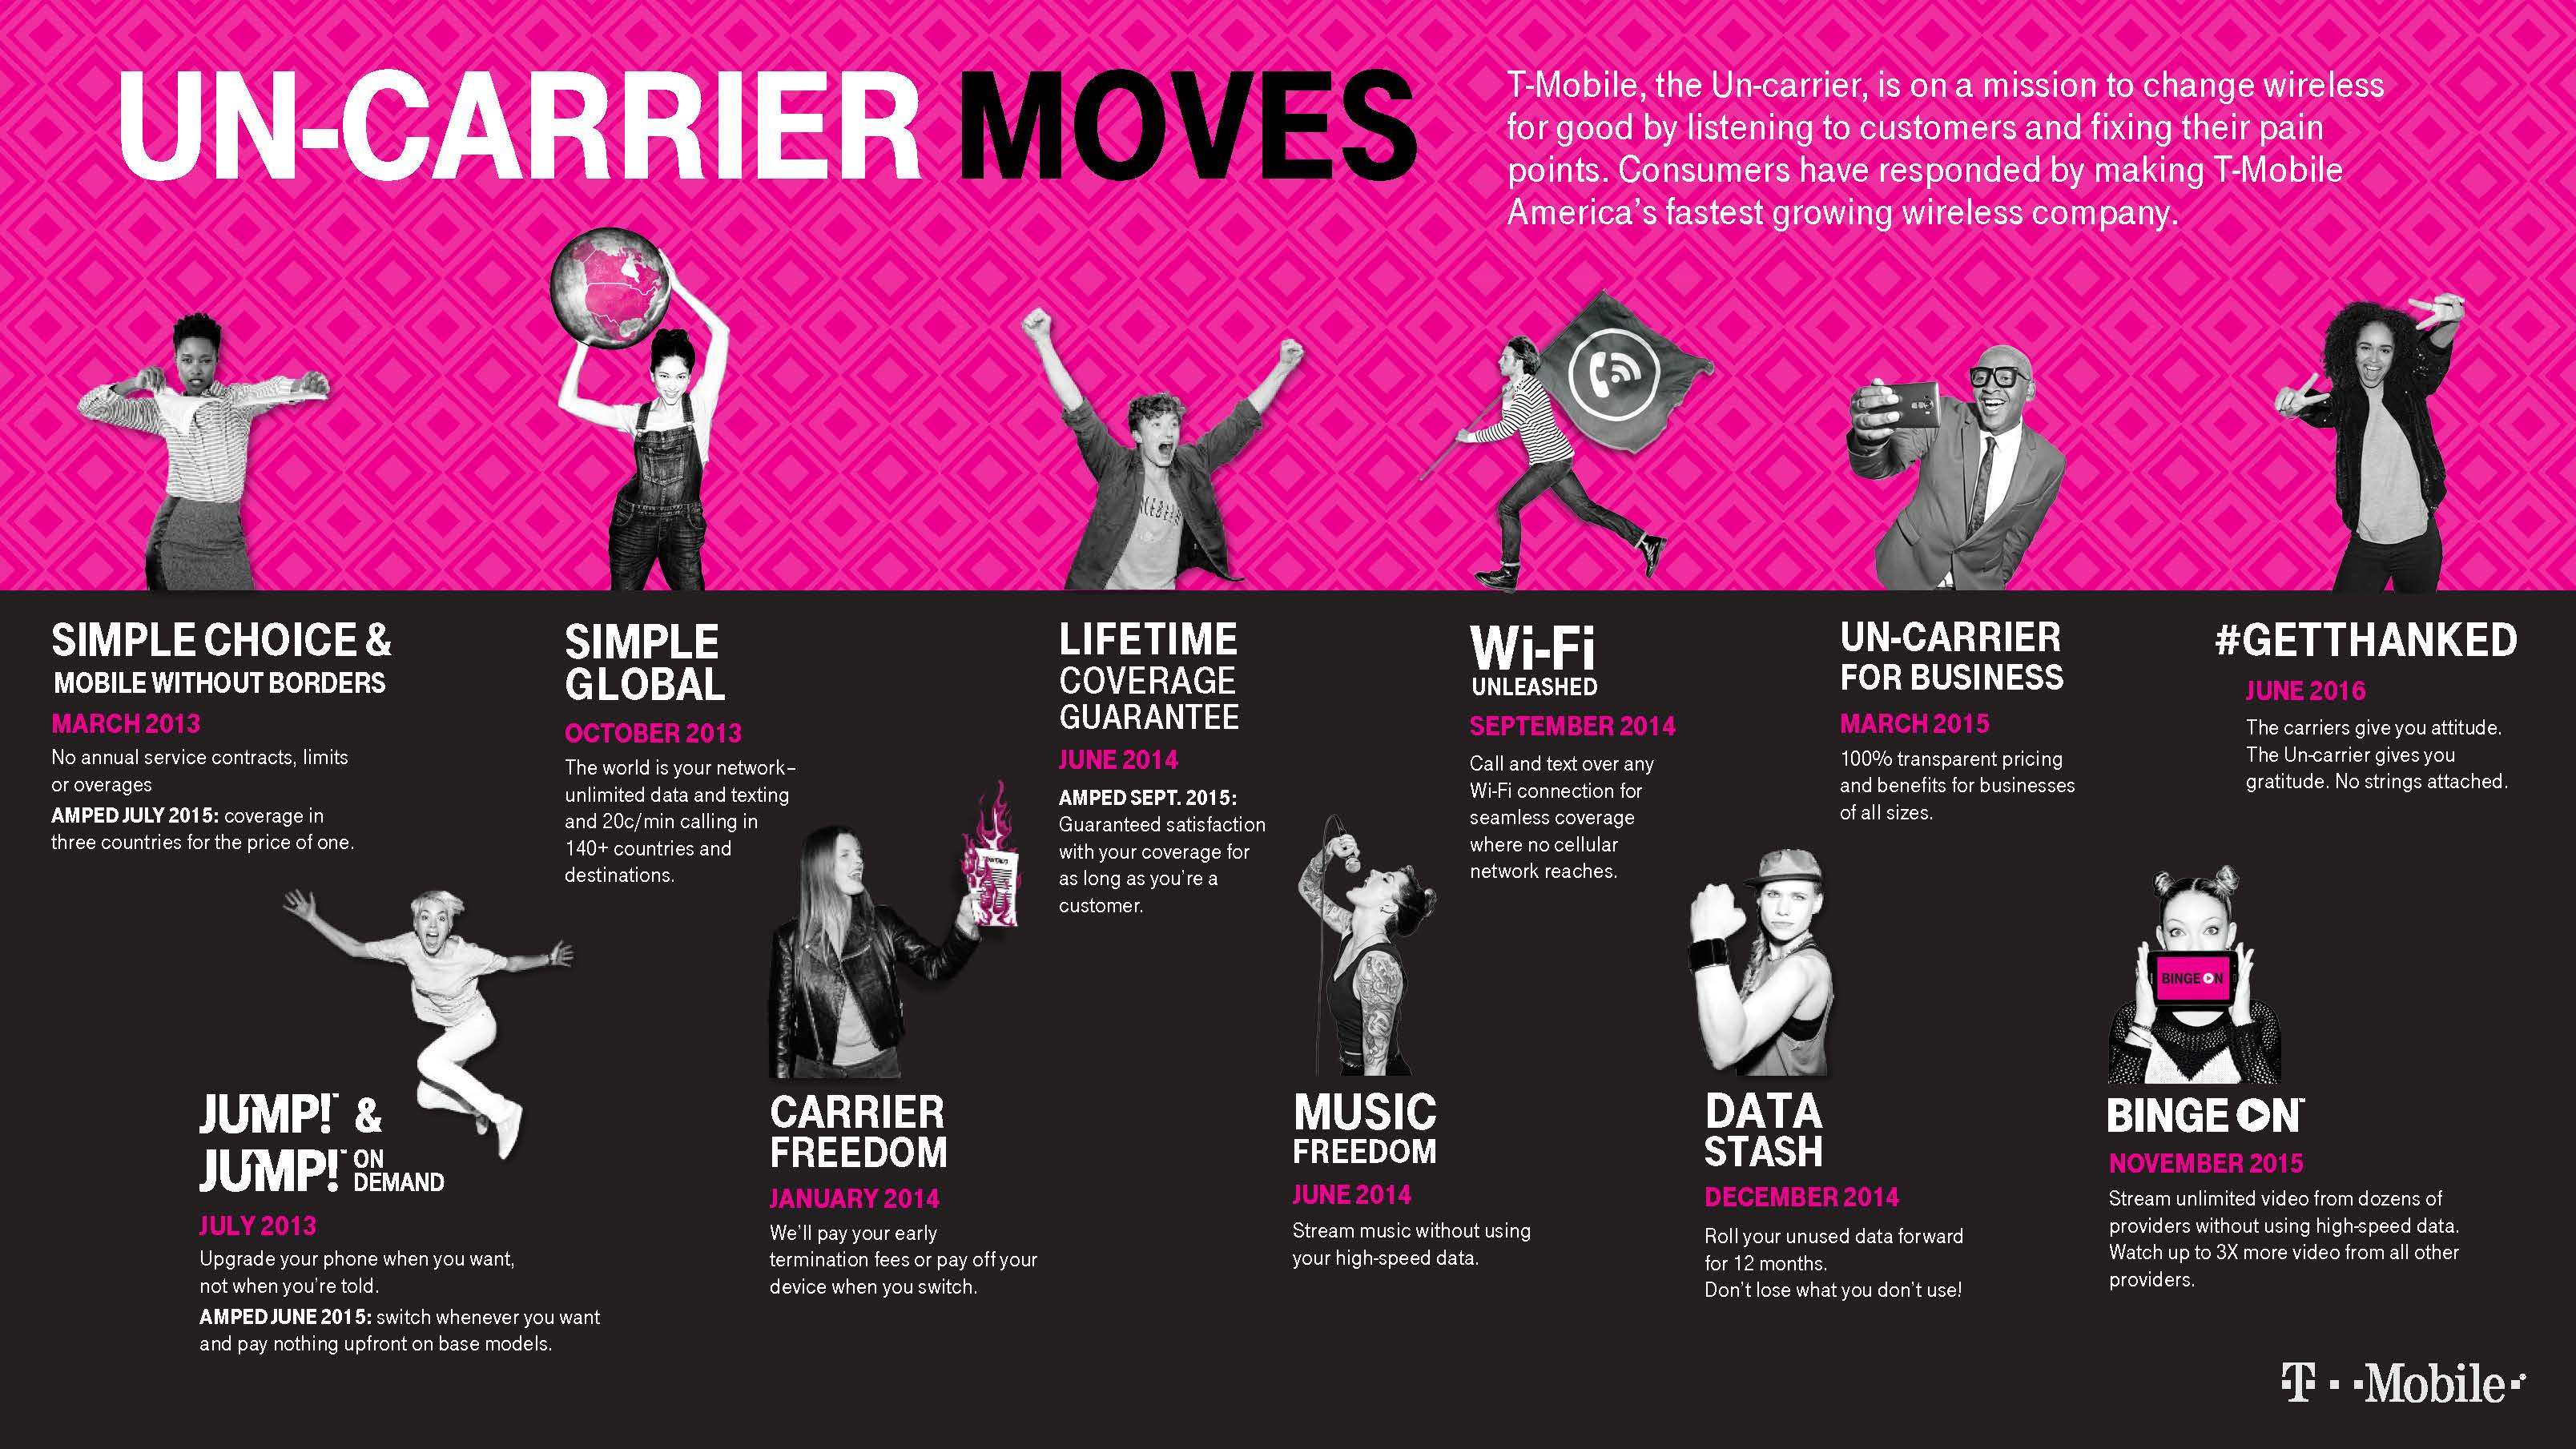 steps-of-the-uncarrier-initiative-at-t-mobile-v13